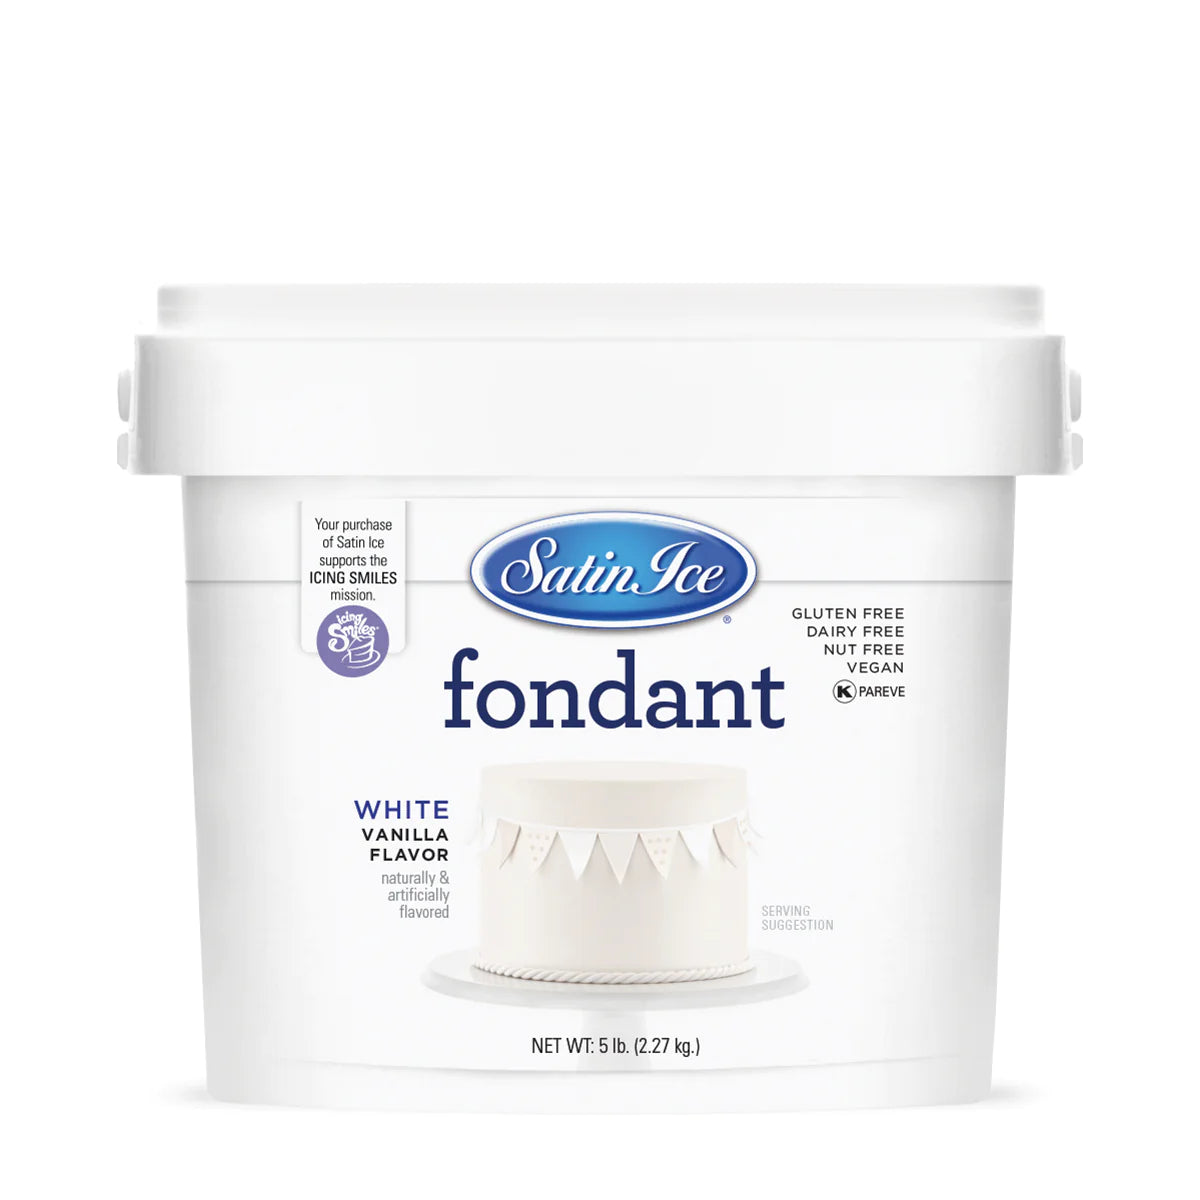 White Colored and Vanilla Flavored Fondant in a 5 Pound Container